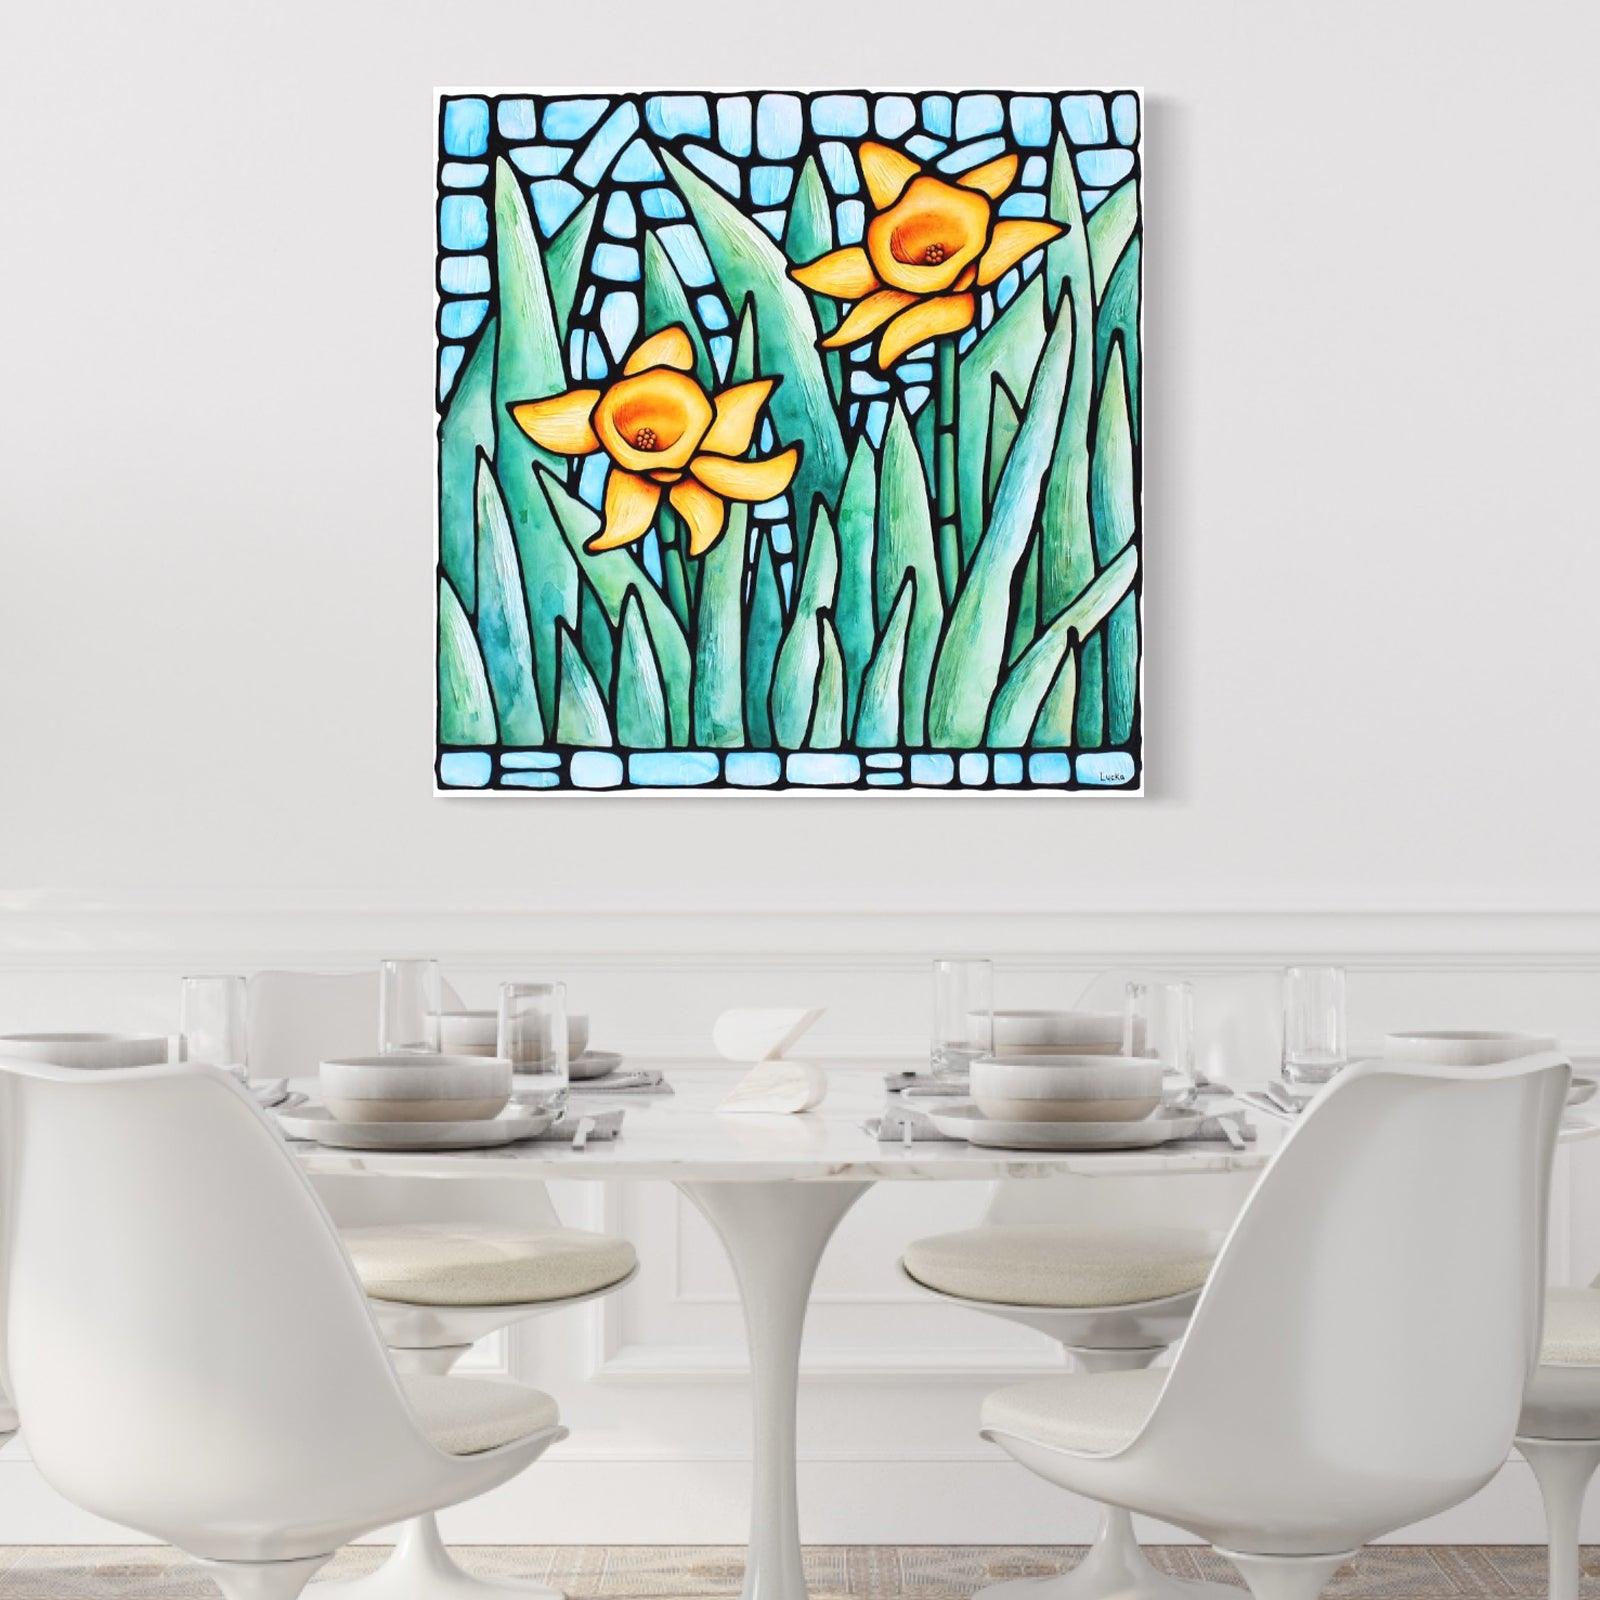 Yellow Daffodil Original Painting 30 x 30 inches